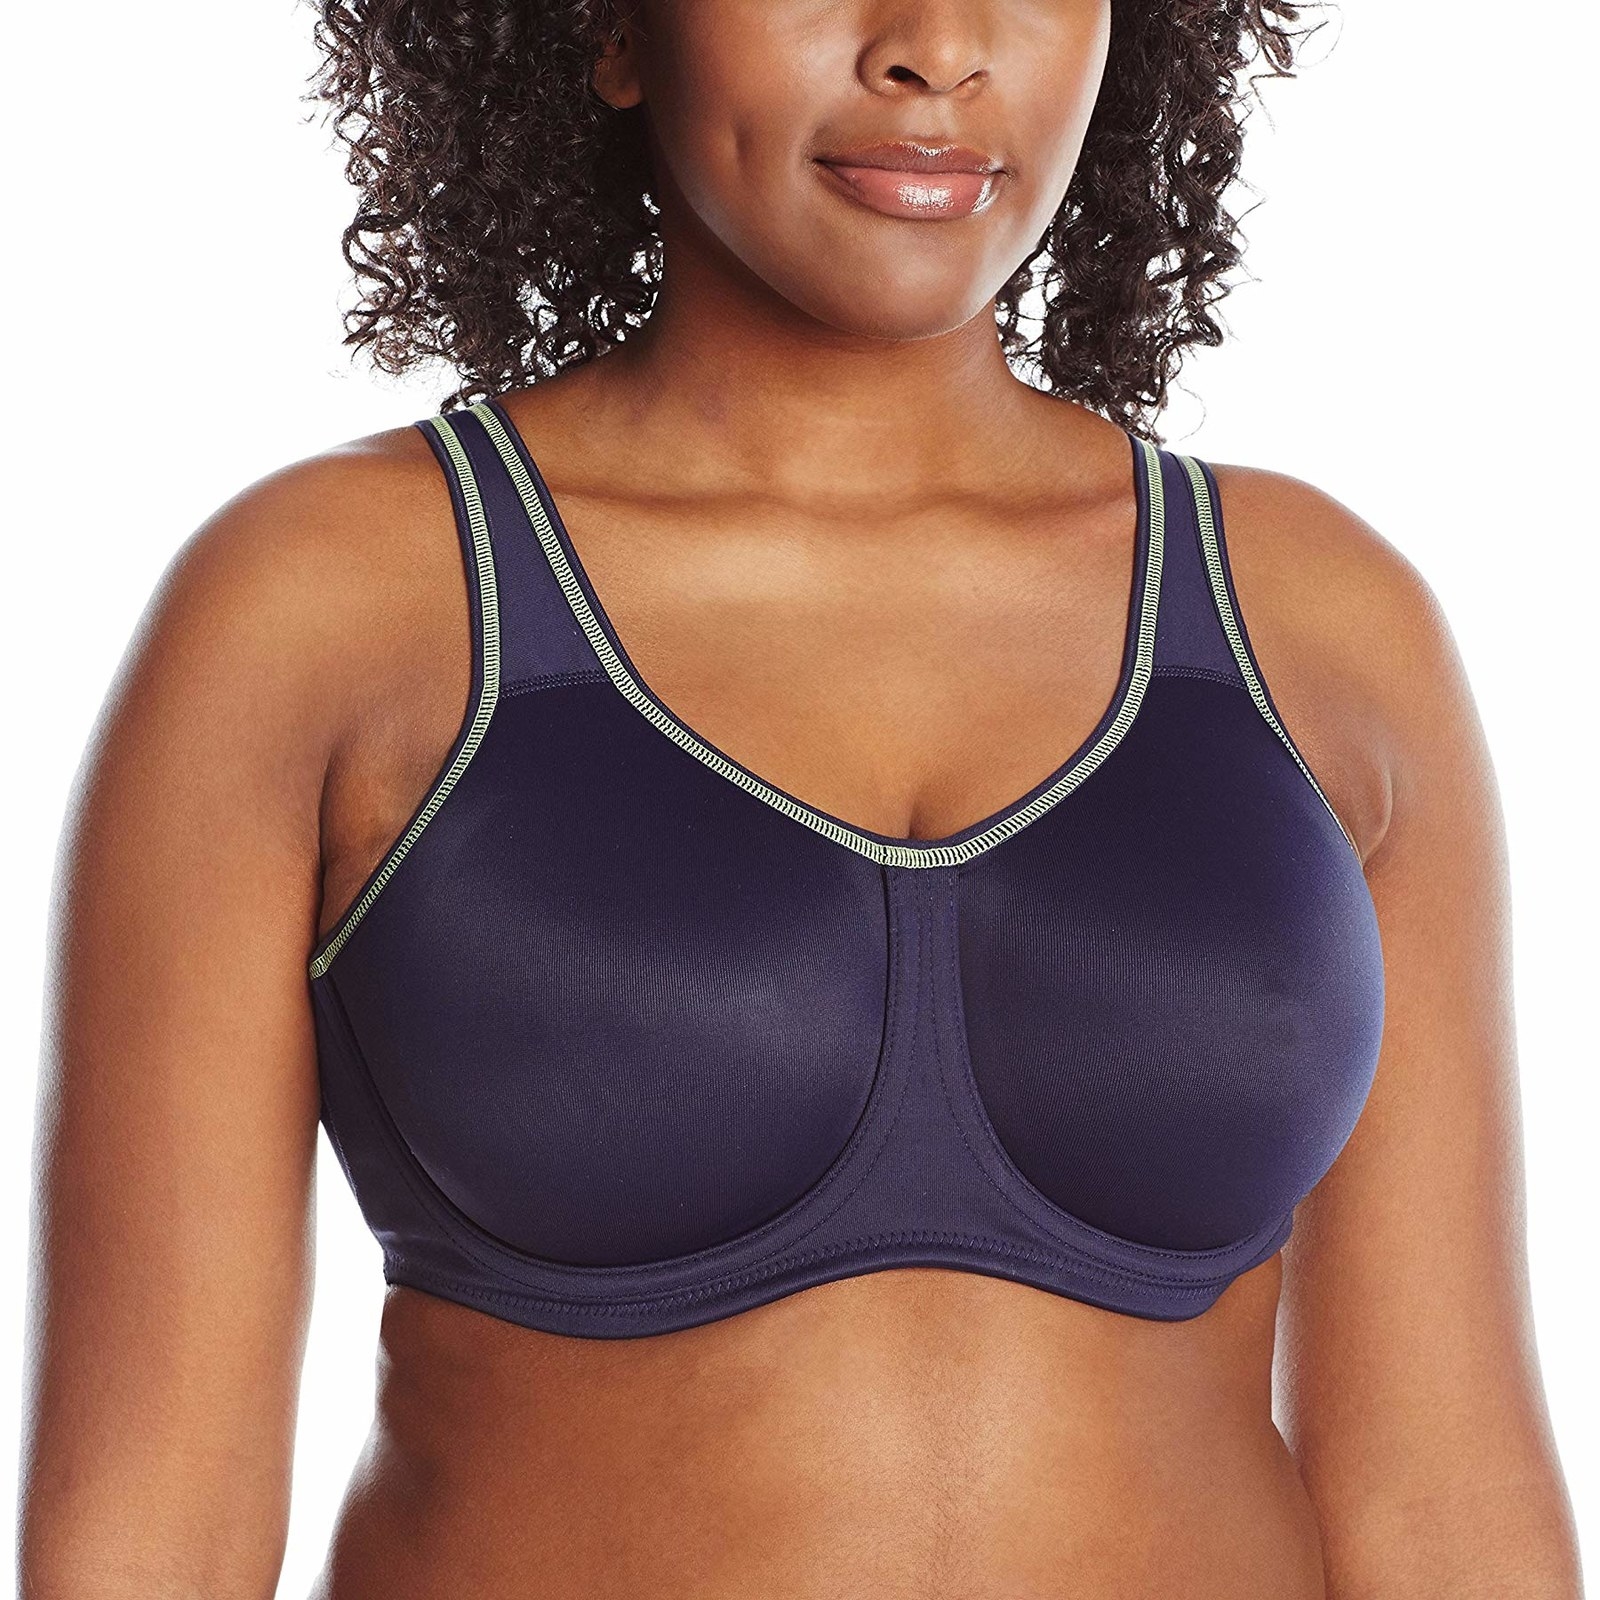 36 Best Images Best Sports Bras For Dd The Best Sports Bras For Large Breasts According To 